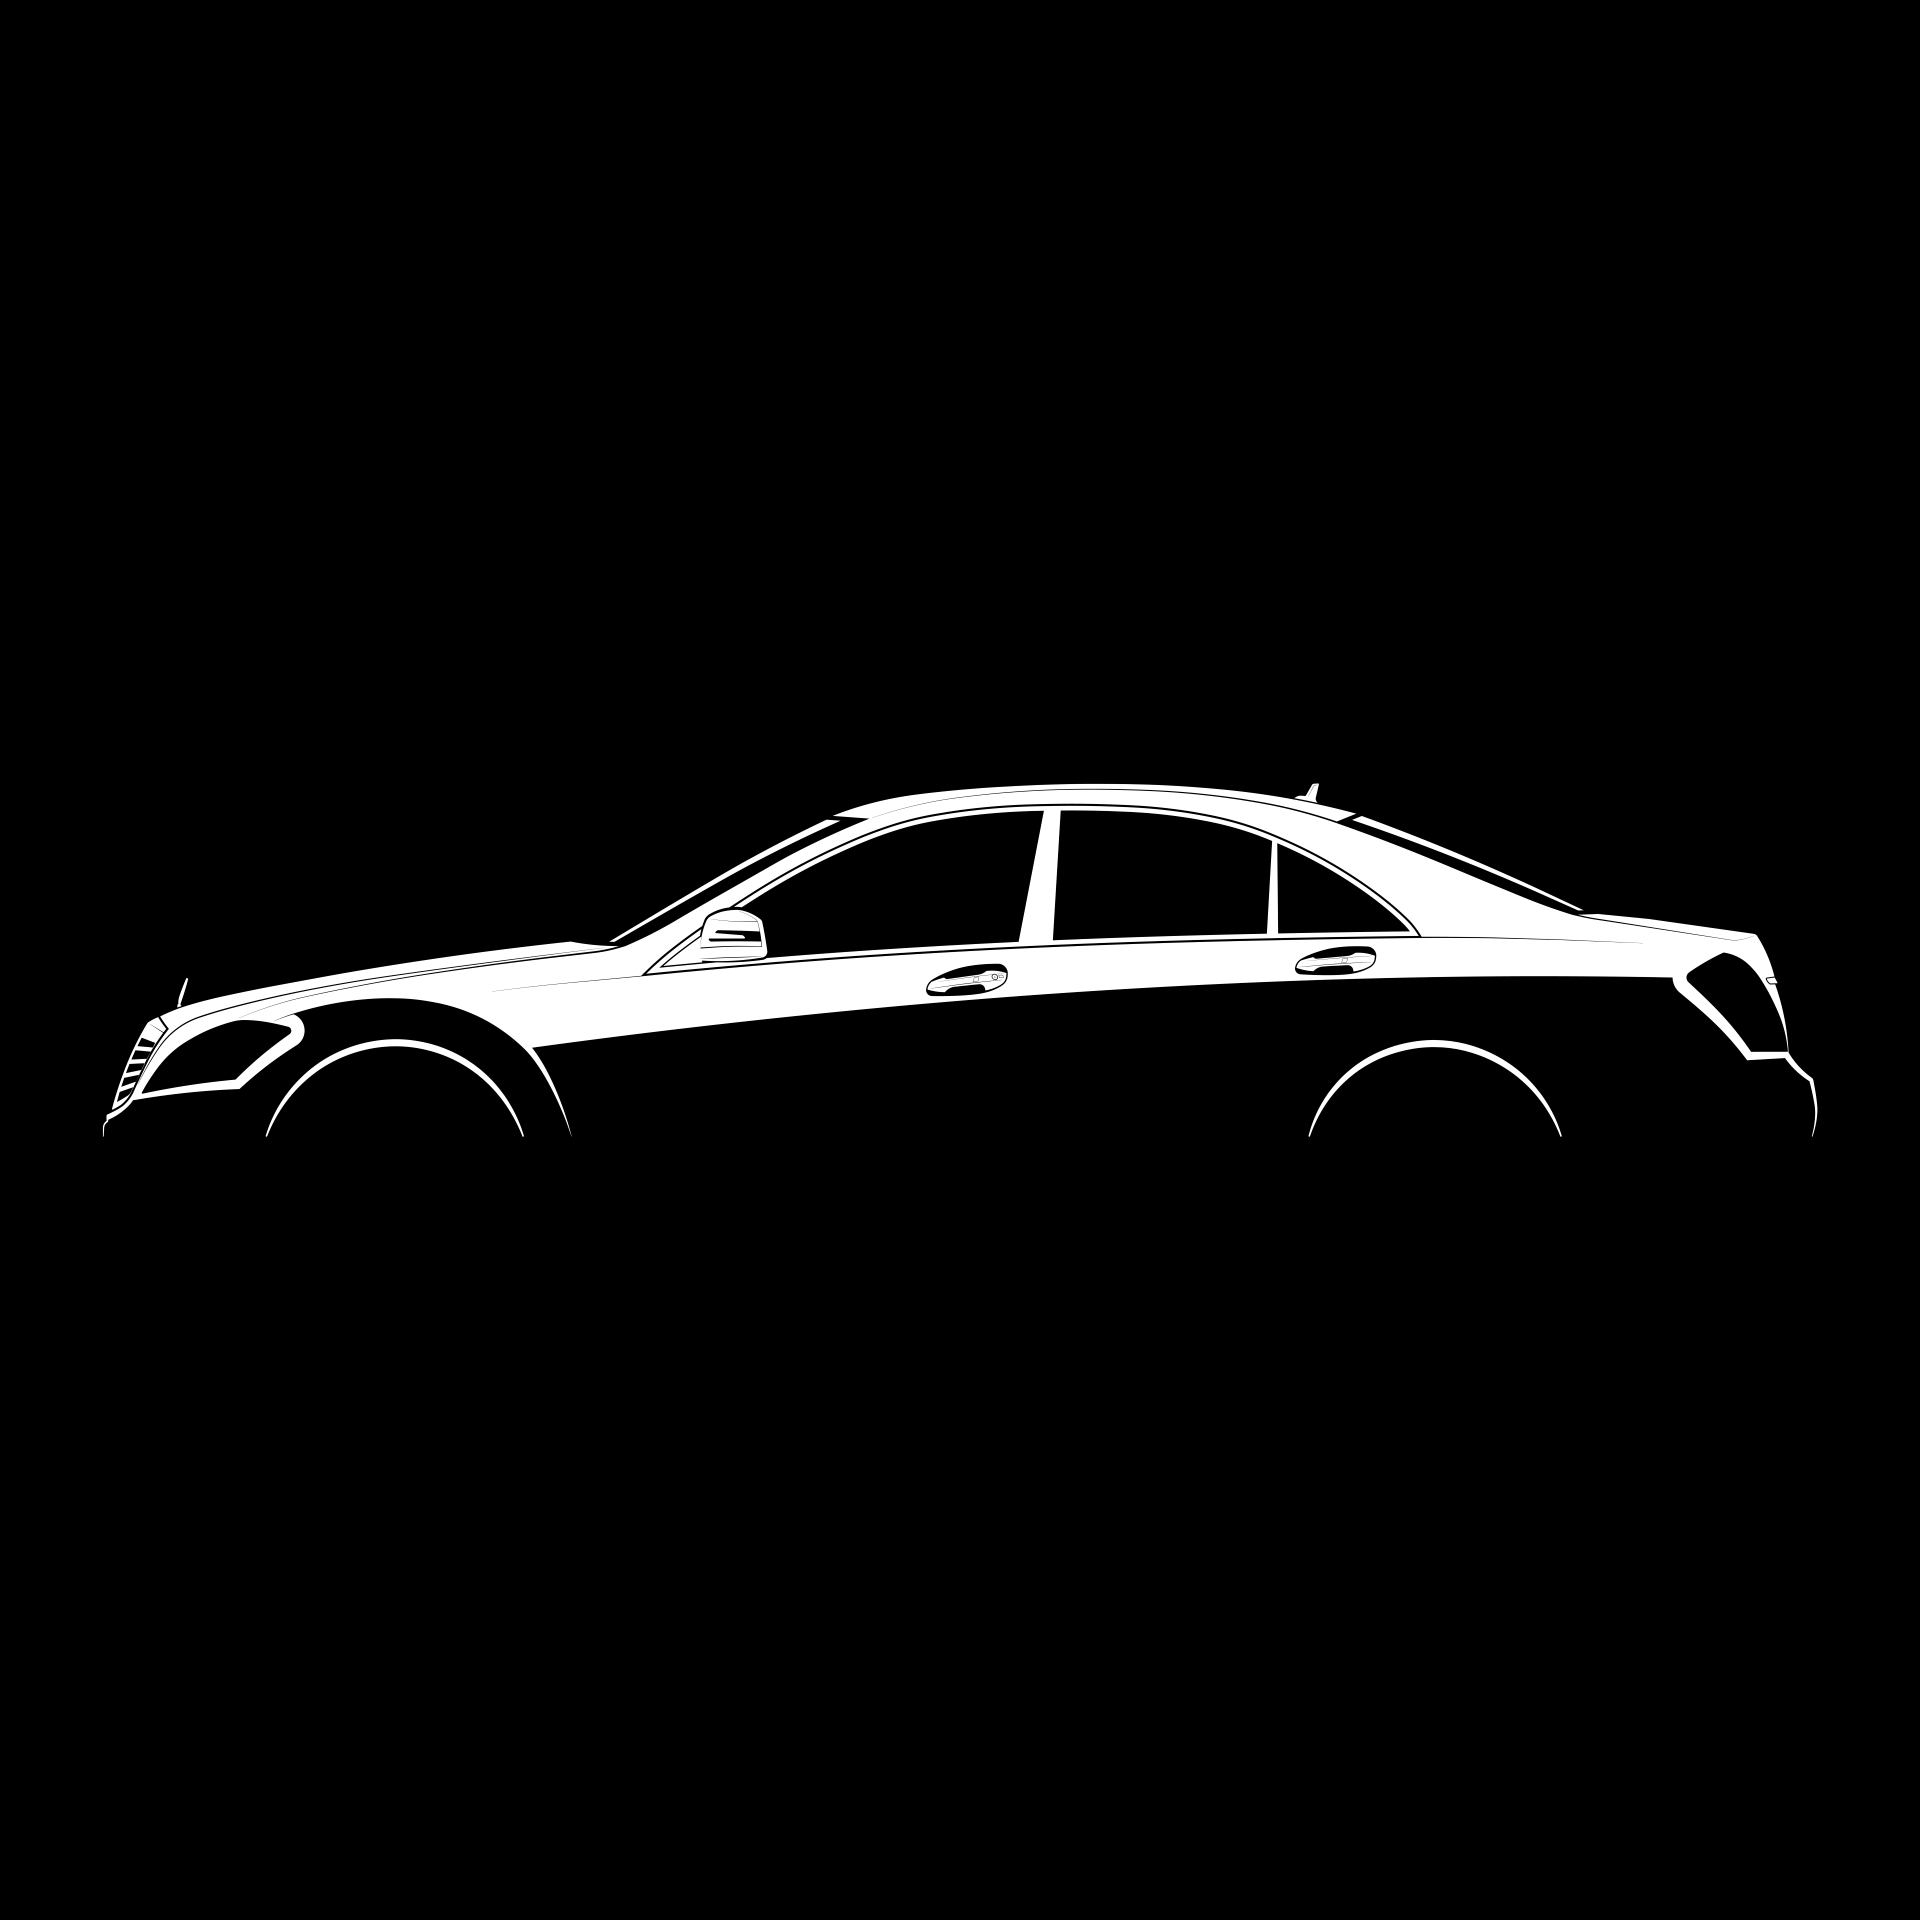 Silhouette of Mercedes-w221 by Henry Lin